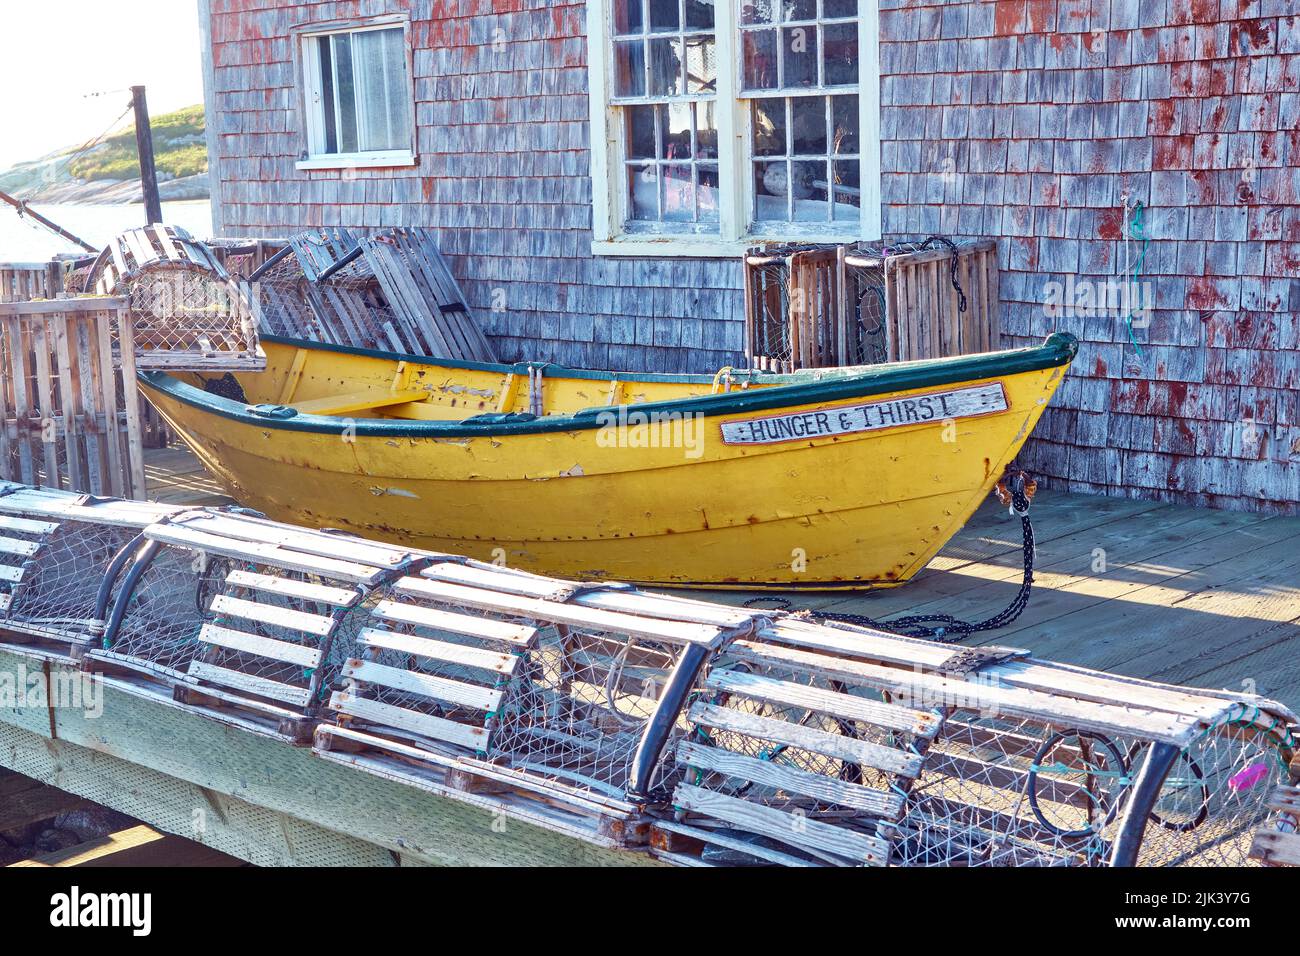 Small yellow fishing dorey sitting on the dock outside a weather fish hut in the small coasta fishing village of Peggy's Cove Nova Scotia. Stock Photo